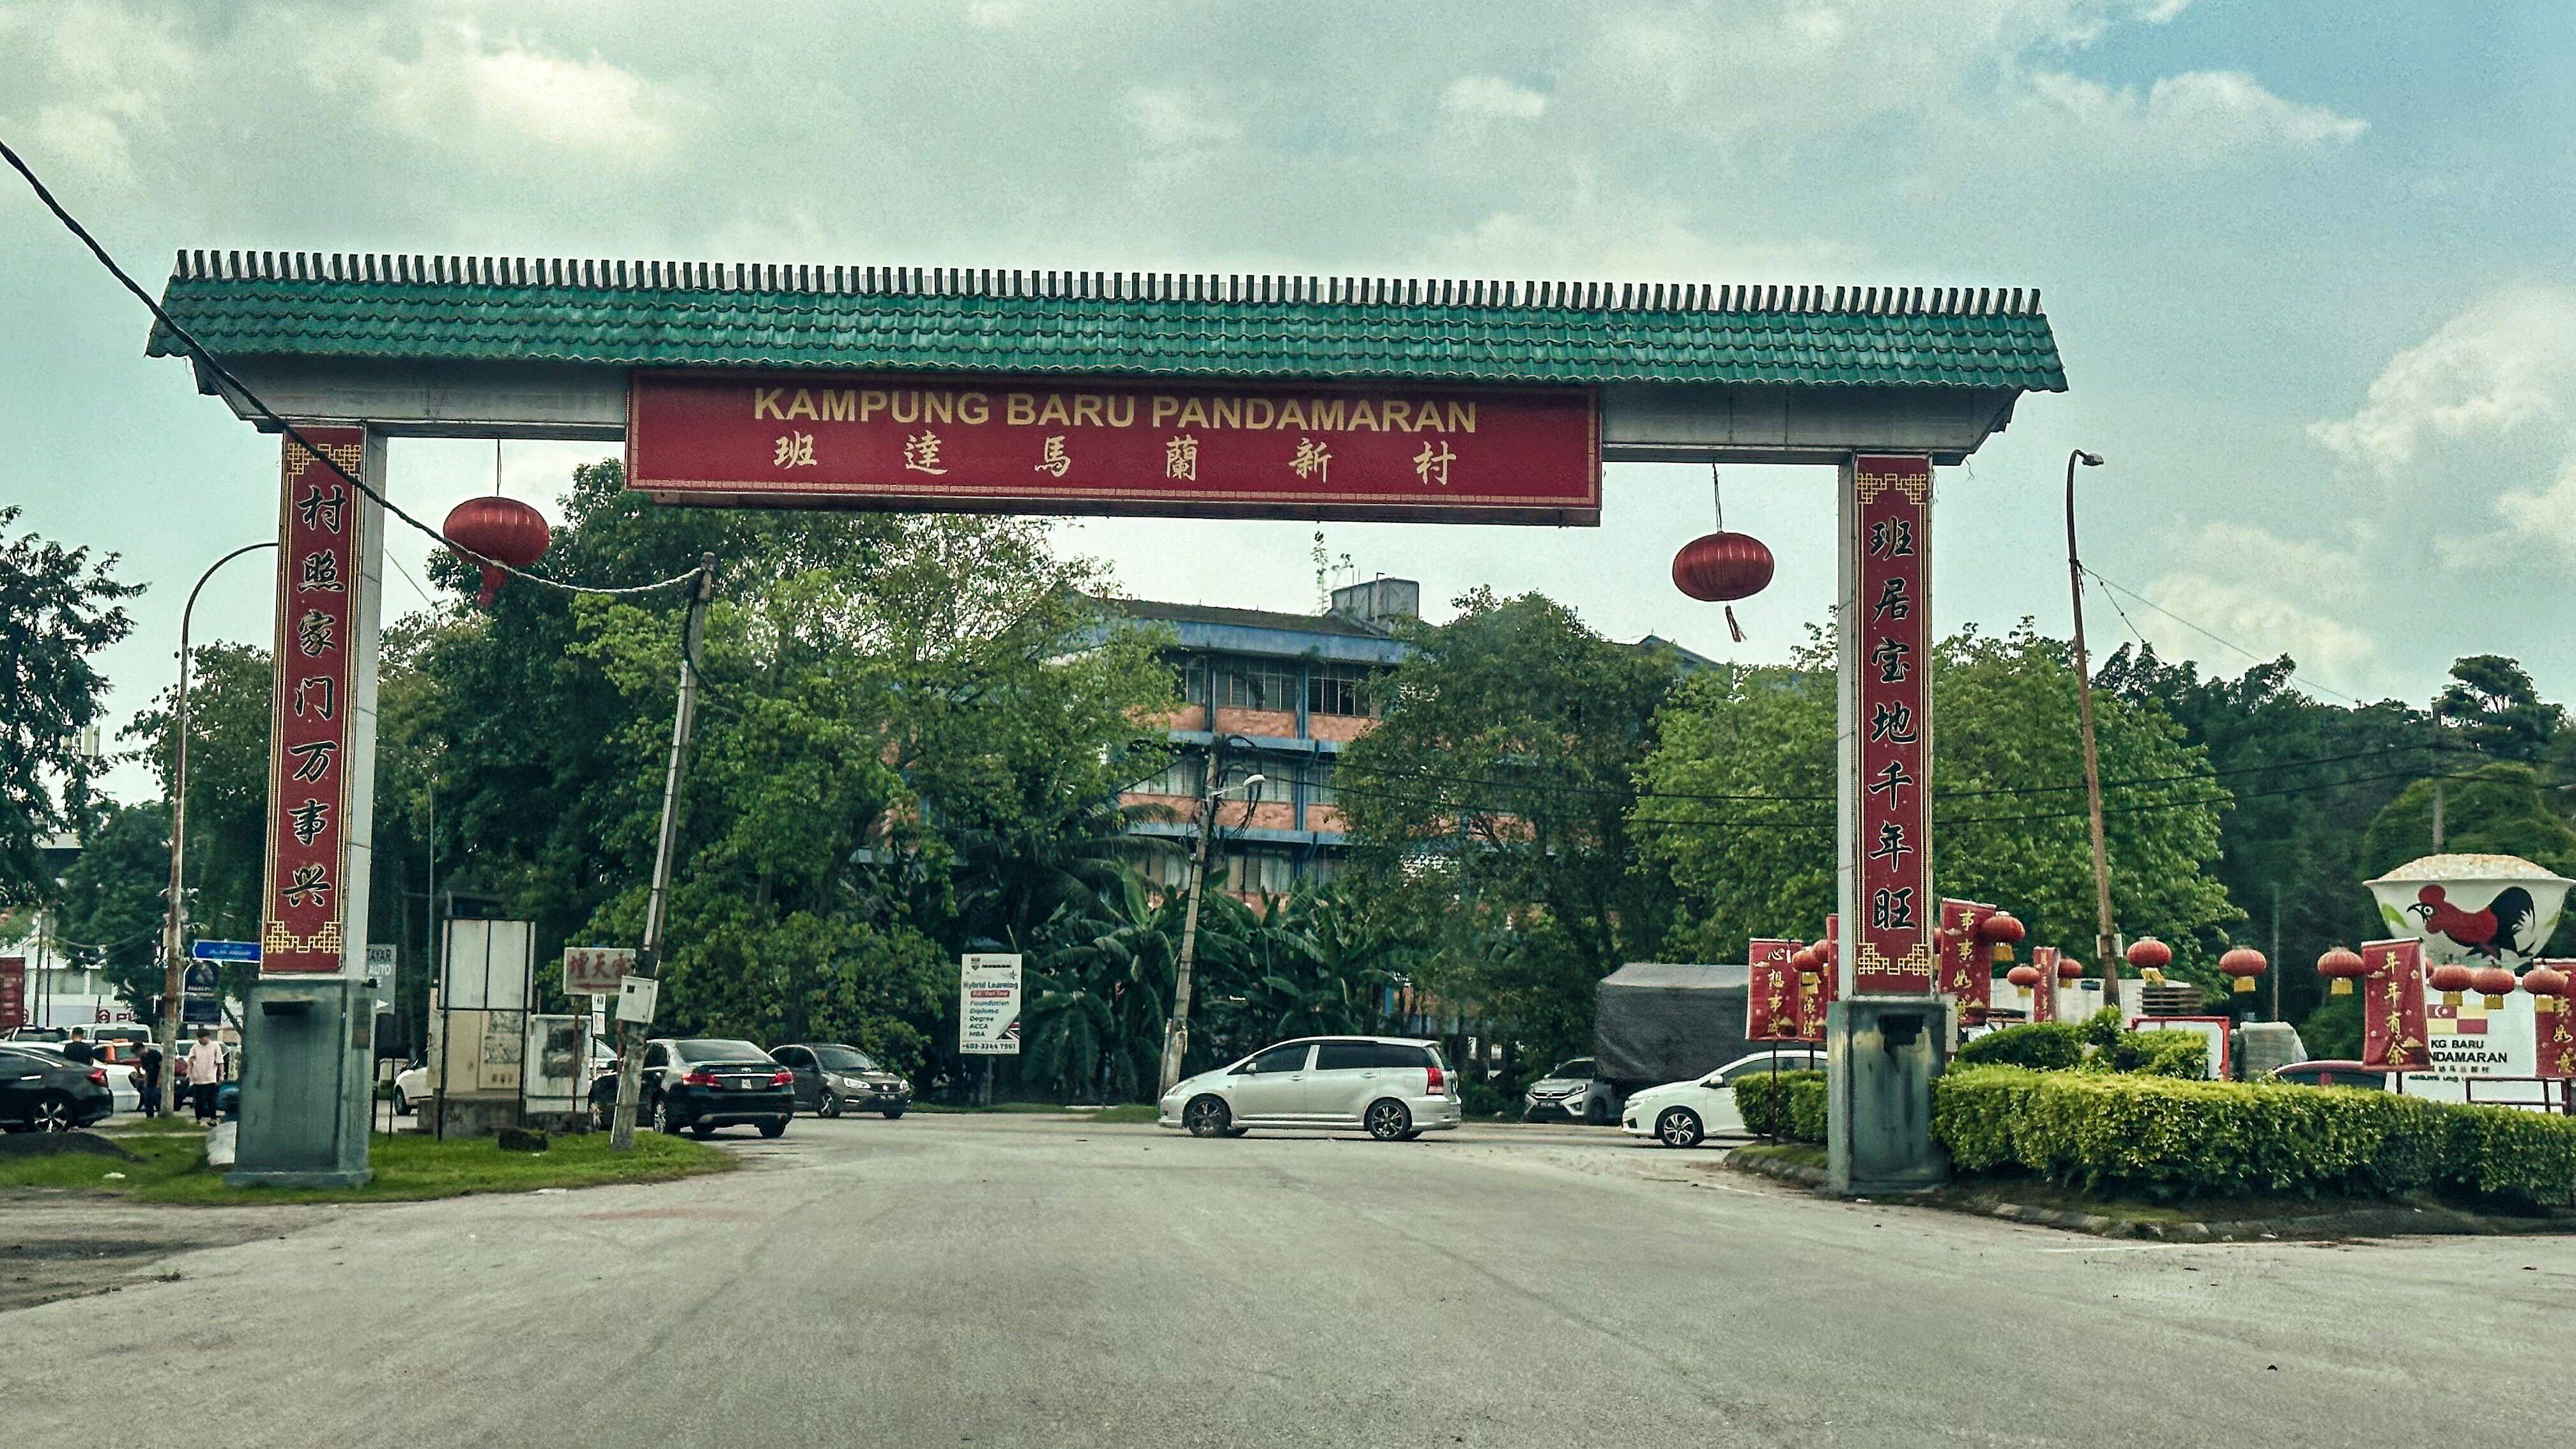 The entrance arch to the Pandamaran New Village at Port Klang, one of the Chinese “new villages” in Malaysia. Photo: Yusof Mohamad